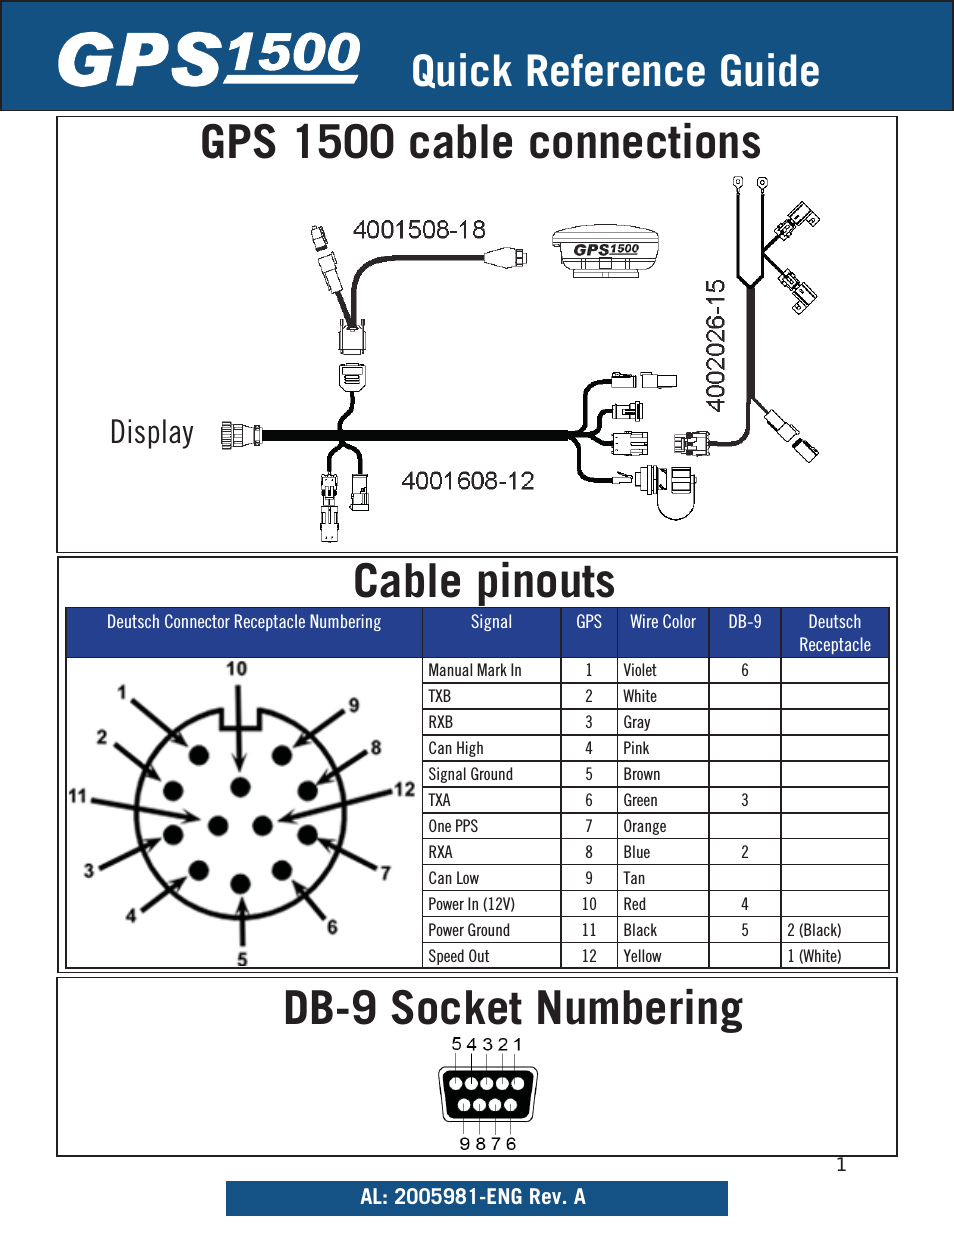 GPS 1500 Quick Reference Guide